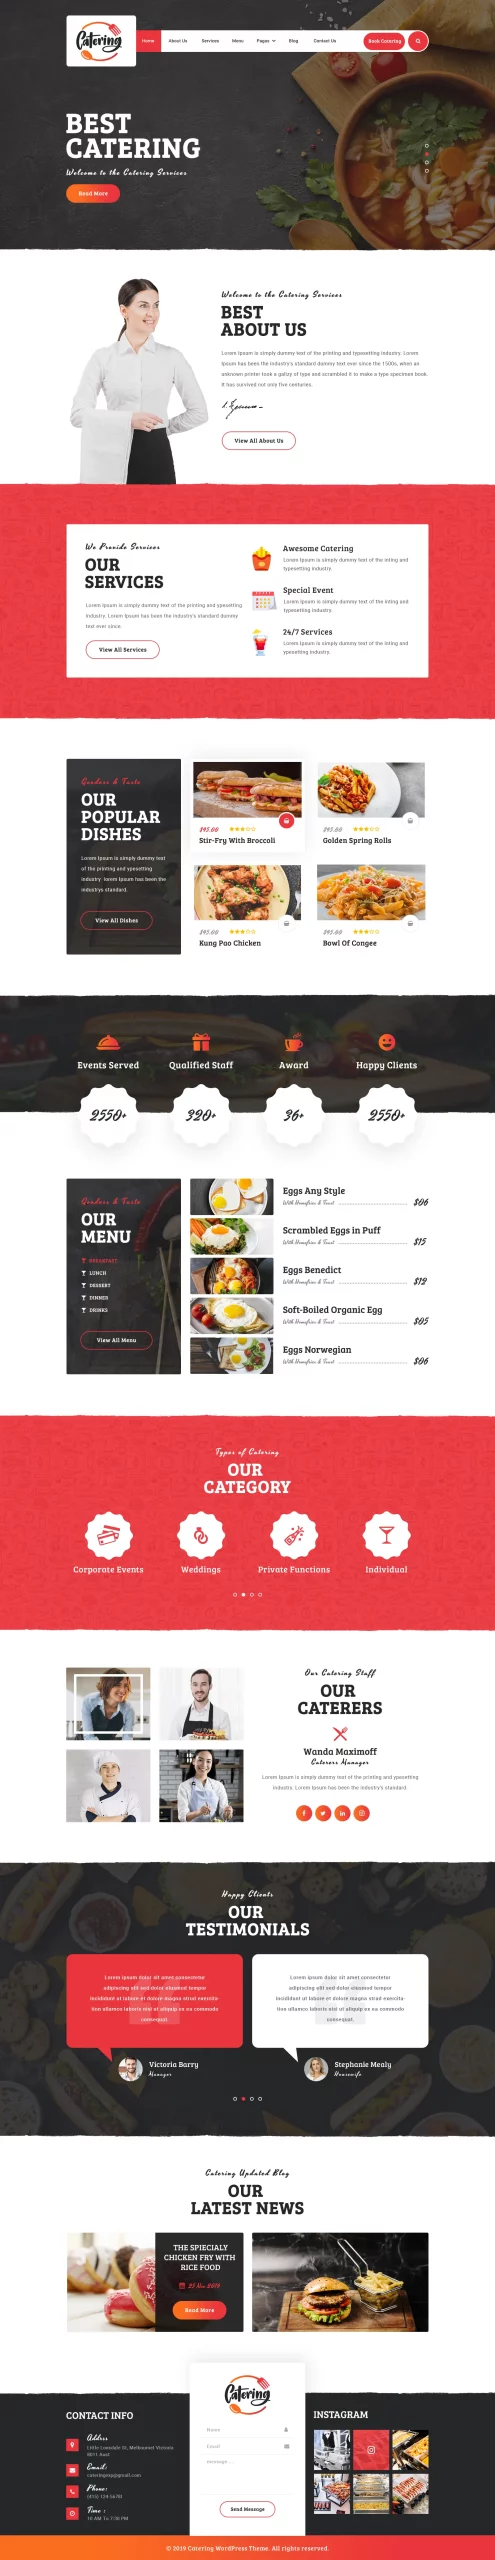 Catering Services WordPress Theme